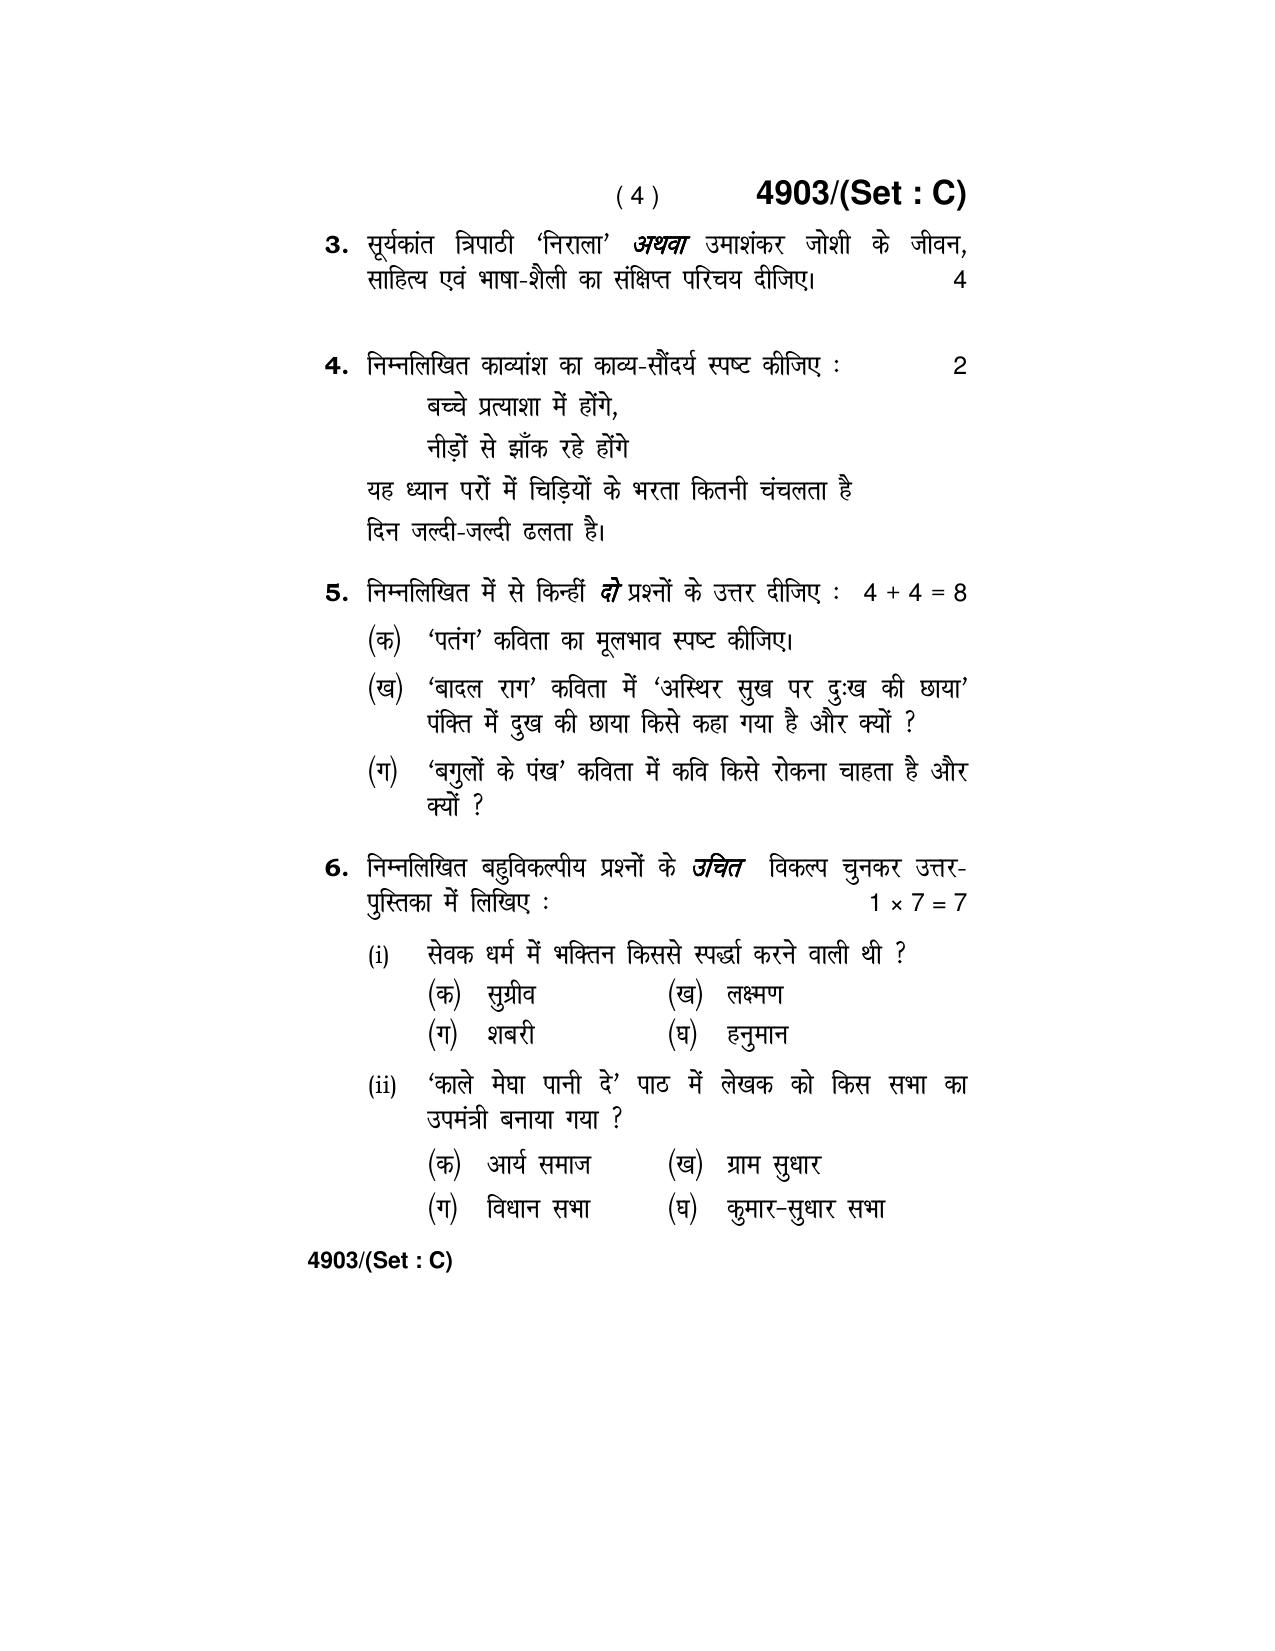 Haryana Board HBSE Class 12 Hindi Core 2020 Question Paper - Page 20